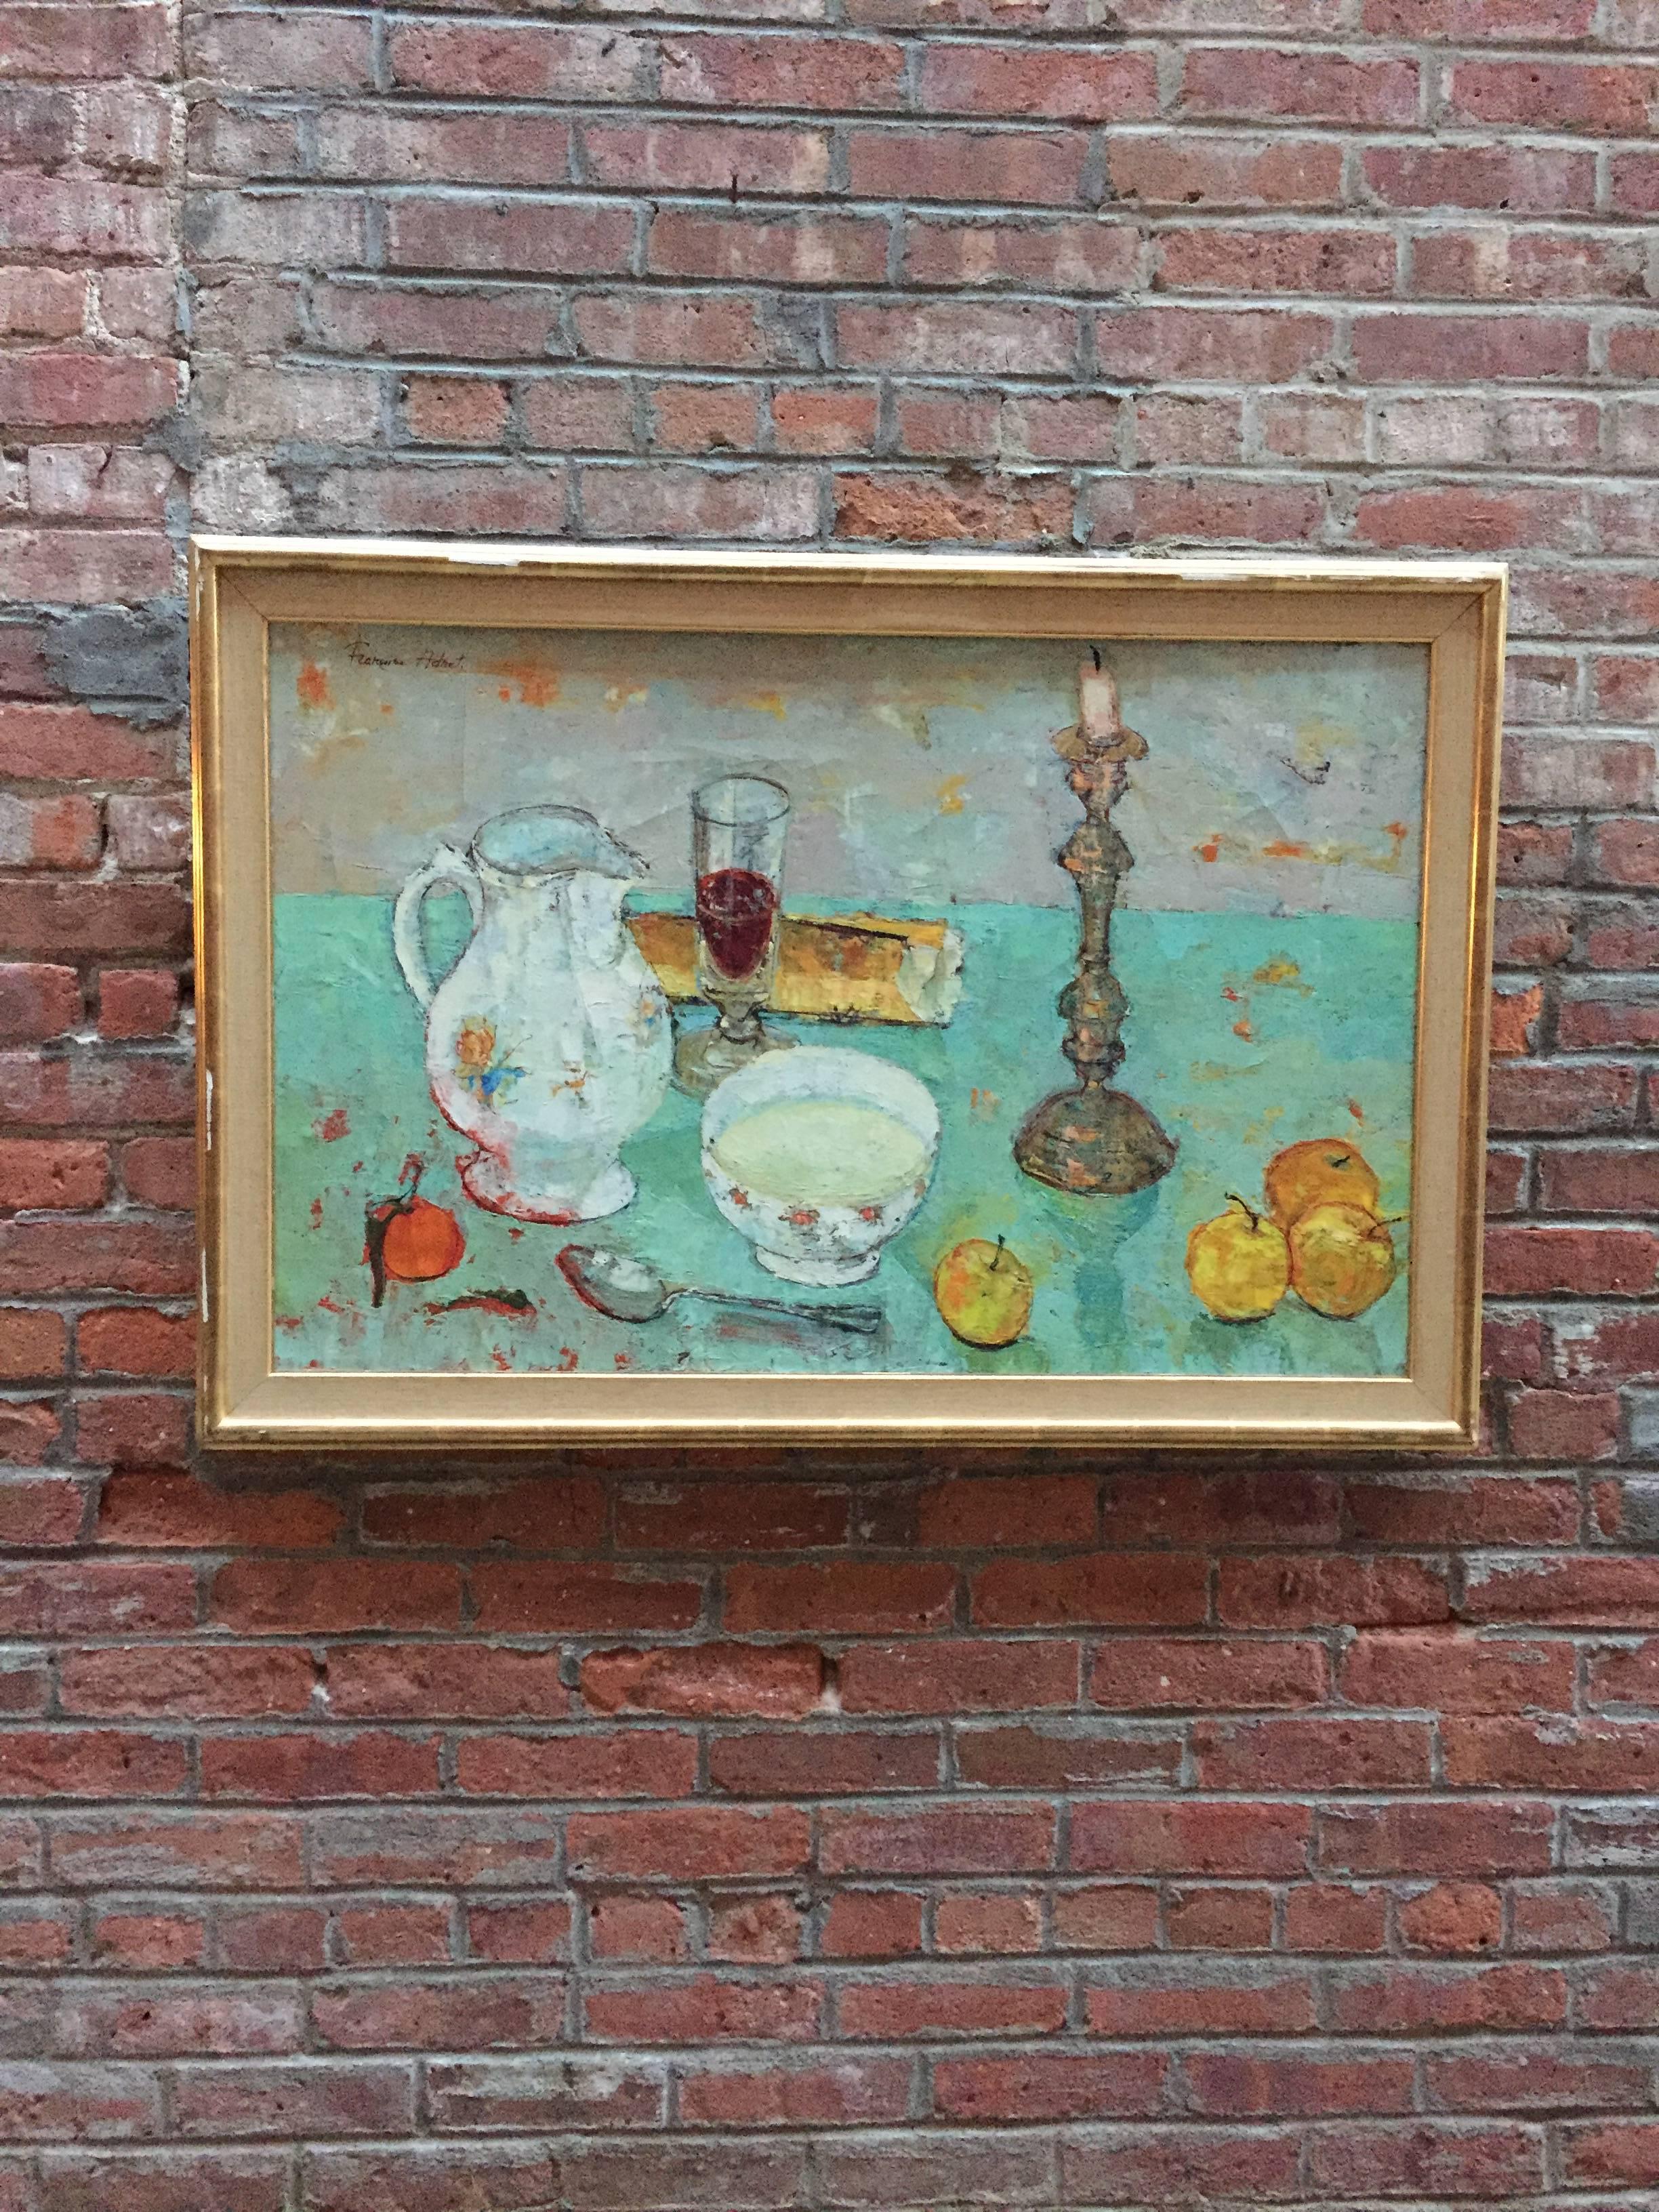 Francoise Adnet (1924-), circa 1960. The media is oil paint on canvas with a gilded wood molding. Adnet was famous for painting beautiful still-life paintings and languid and lyrical women. 


The painting is in overall good condition with some